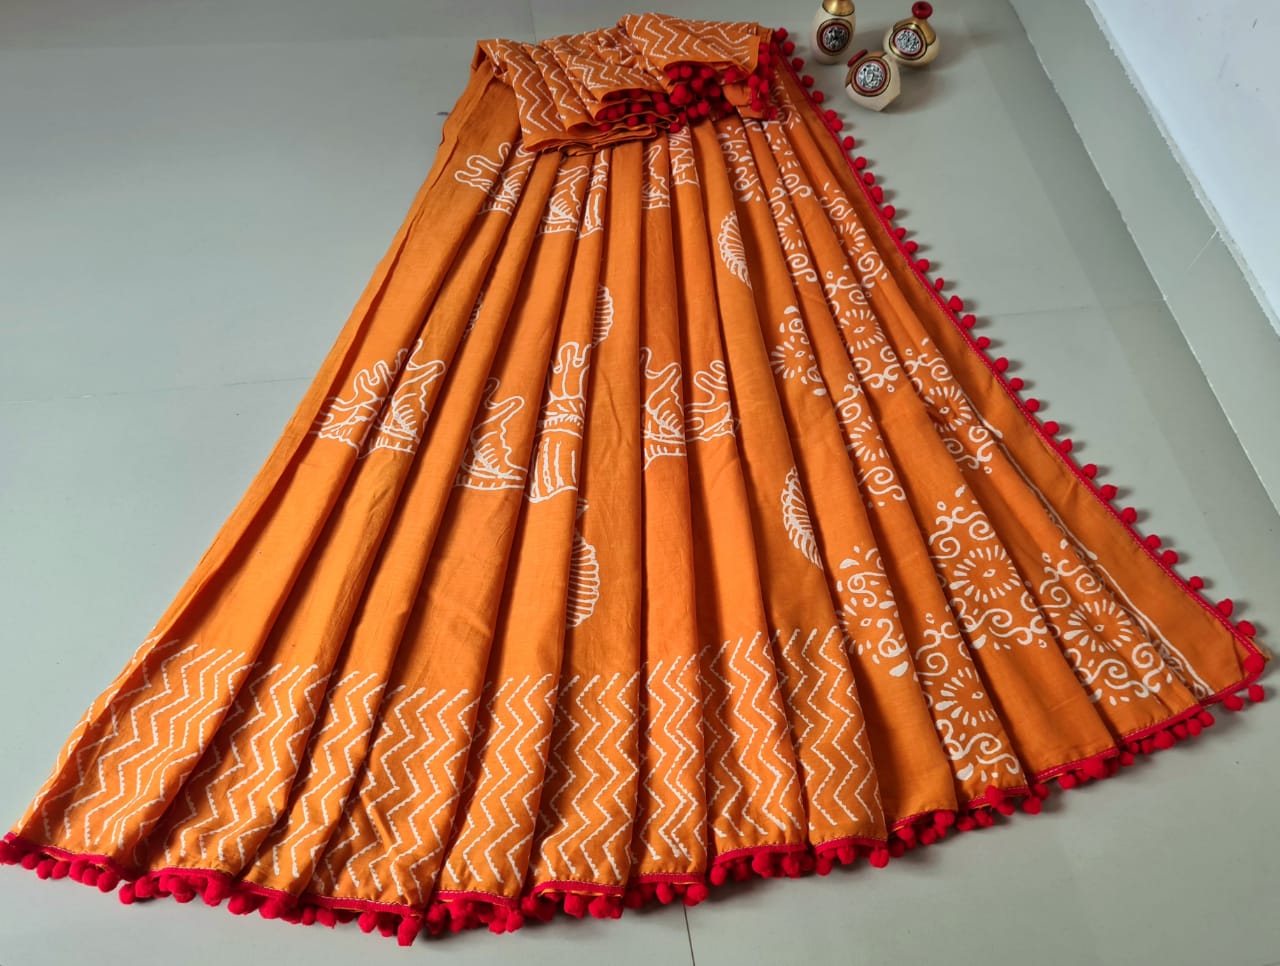 Orange Flower Print Cotton Mul Mul Saree with Blouse and Pom Pom Lace